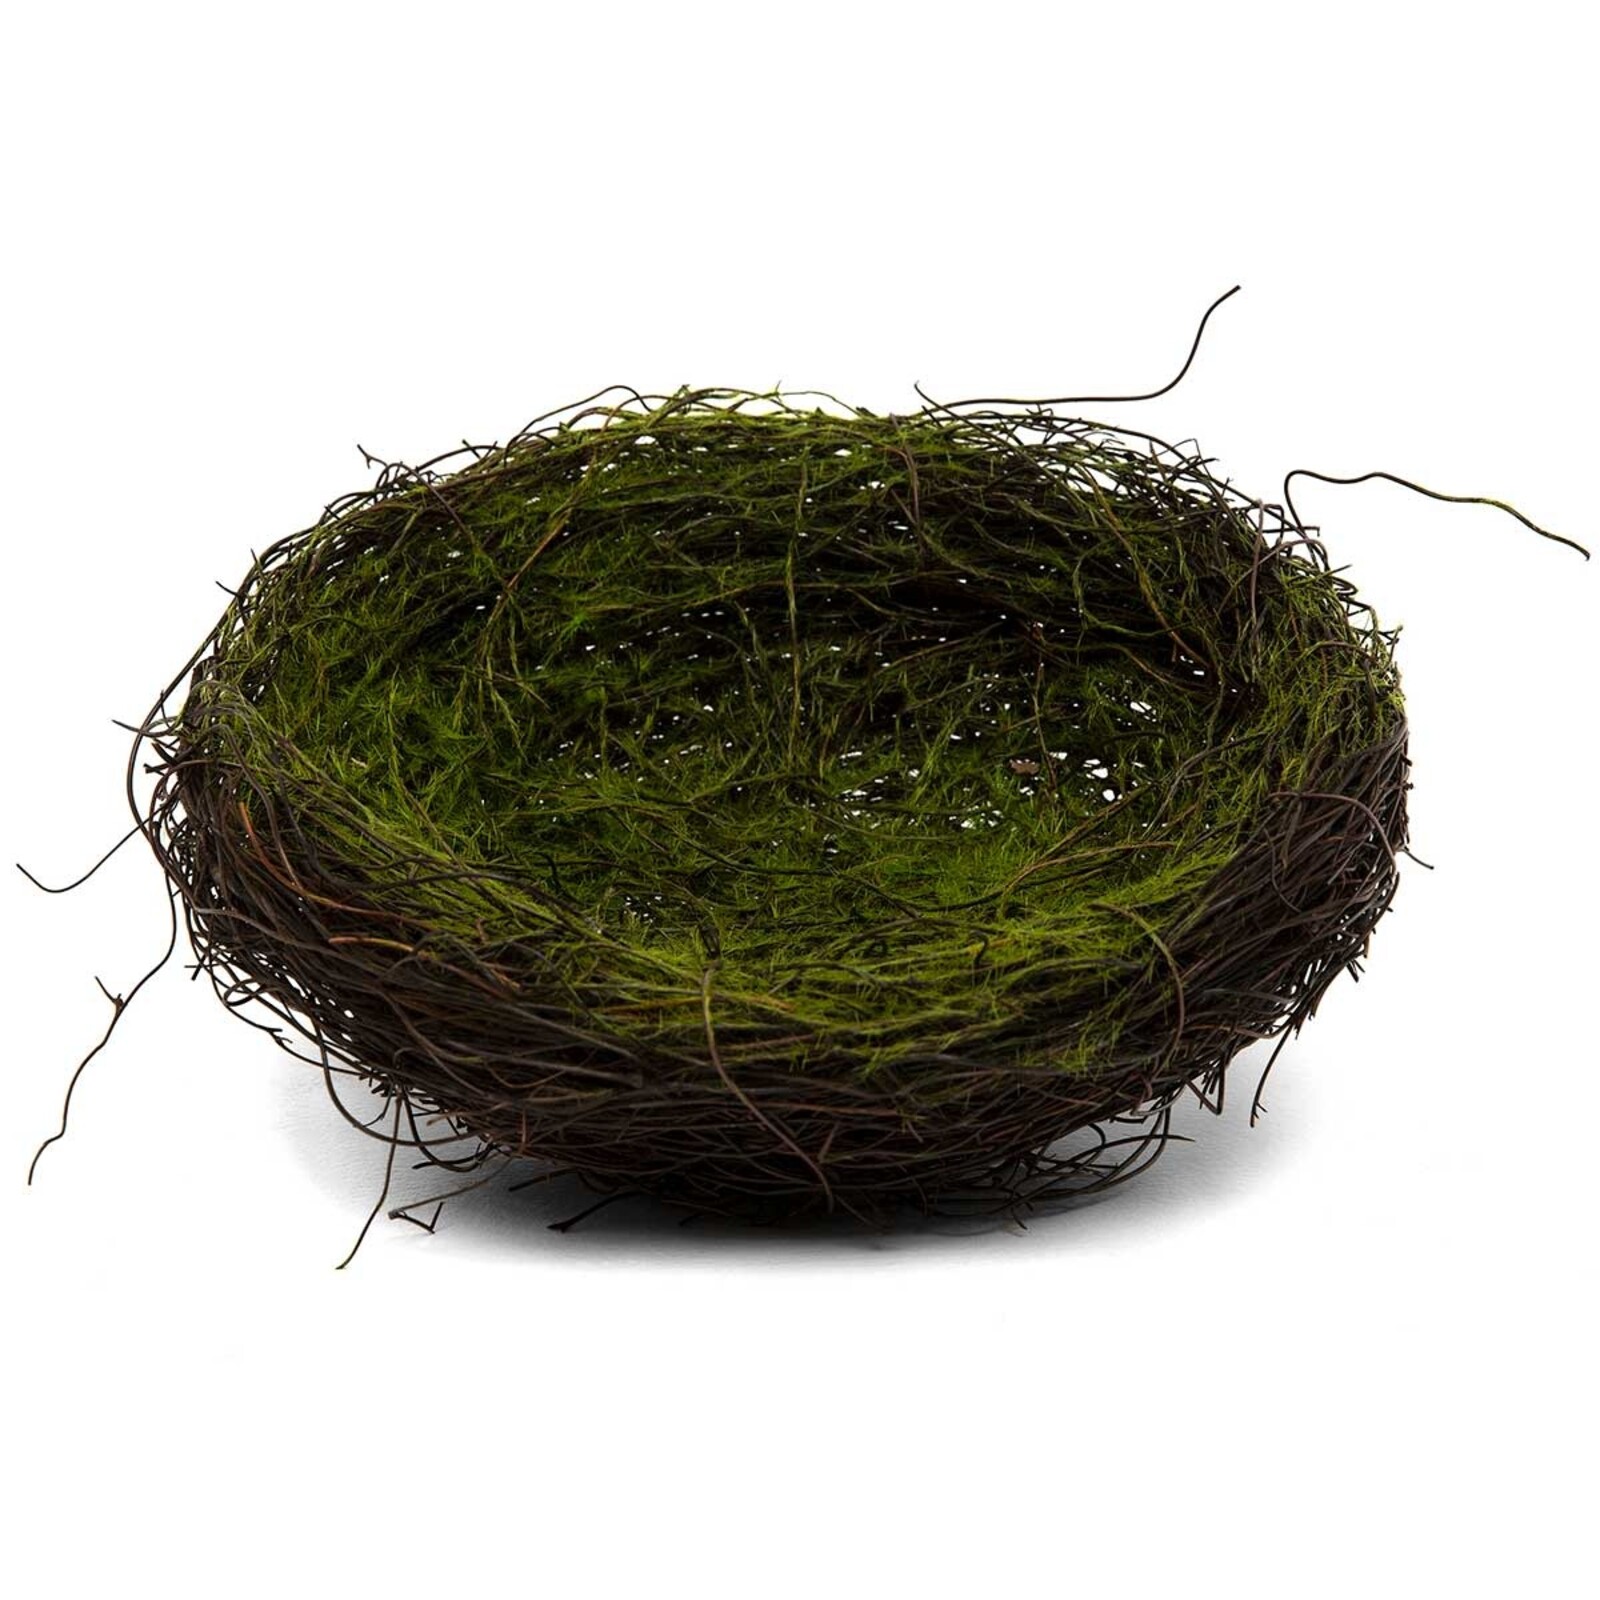 Meravic MOSSY TWIG NEST LARGE 10"X3.5"      T5247 loading=